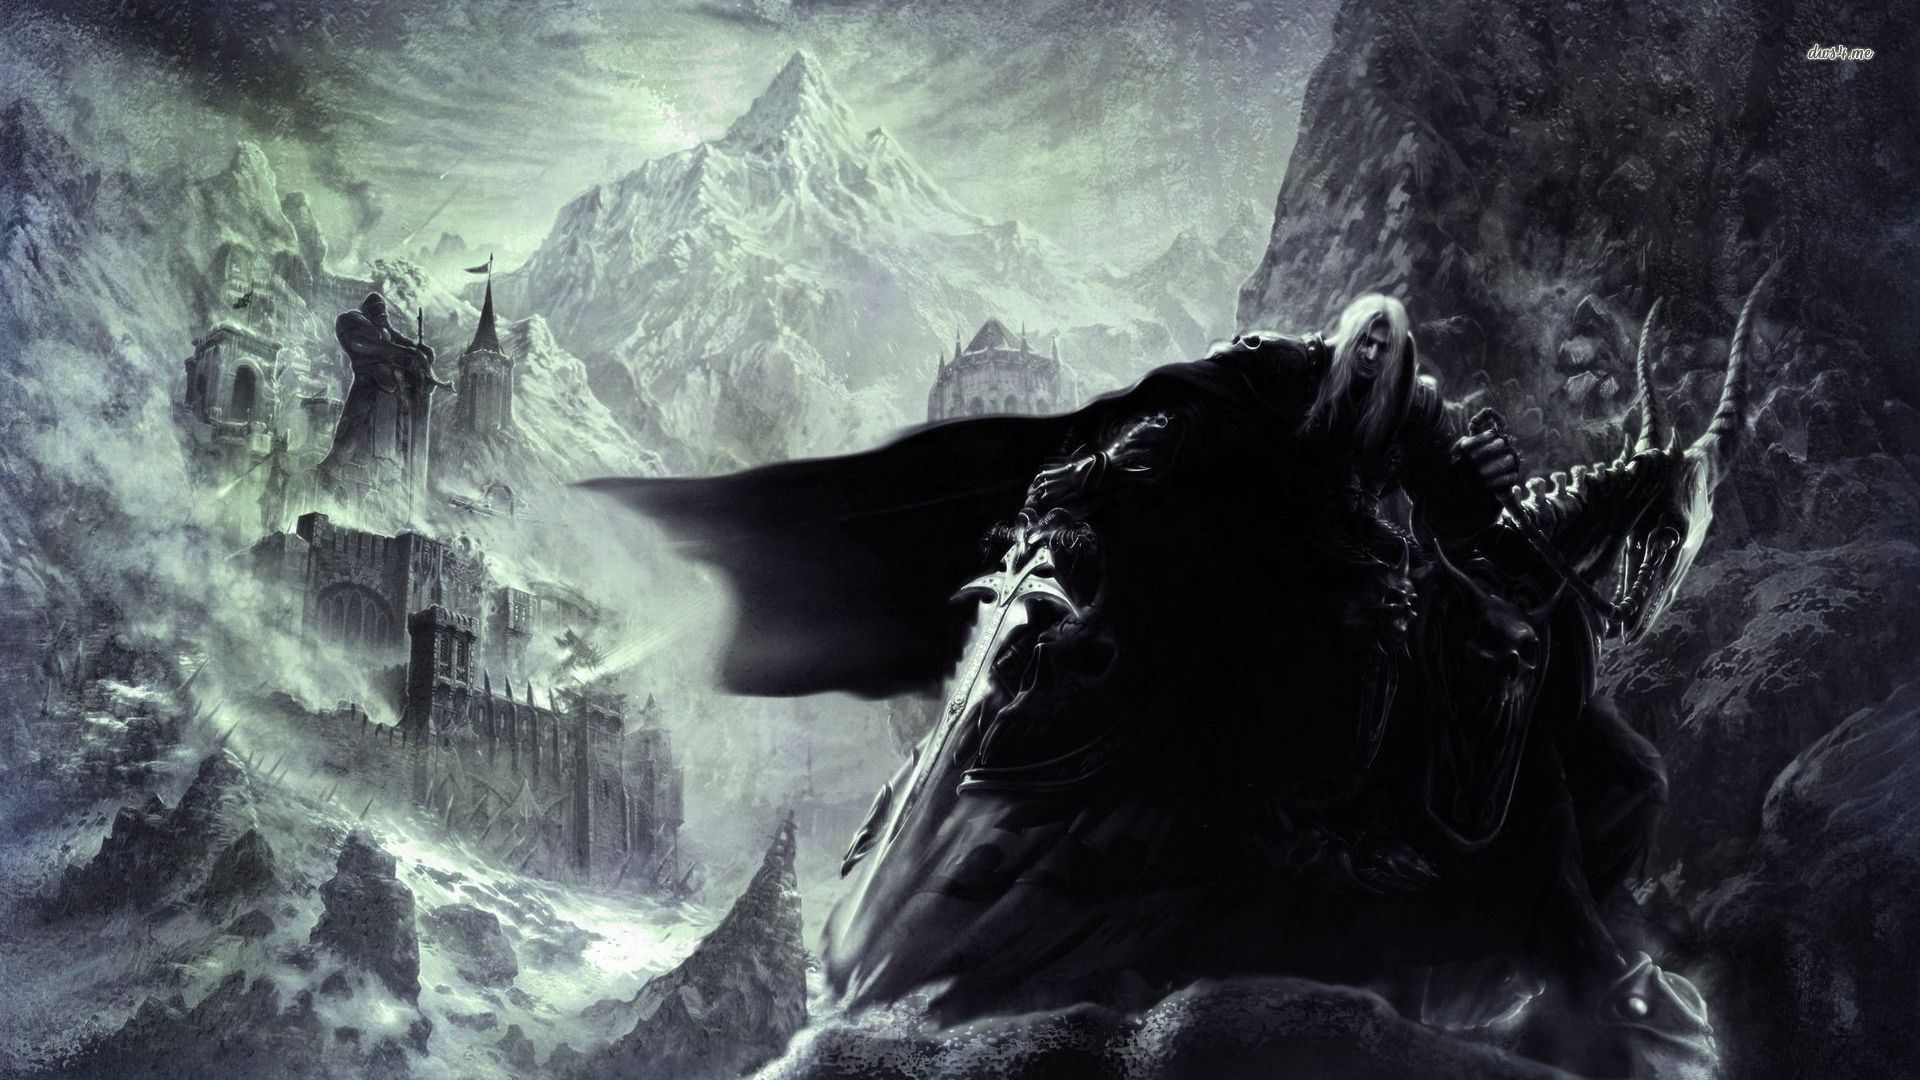 World of Warcraft: Wrath of the Lich King wallpaper - Game ...